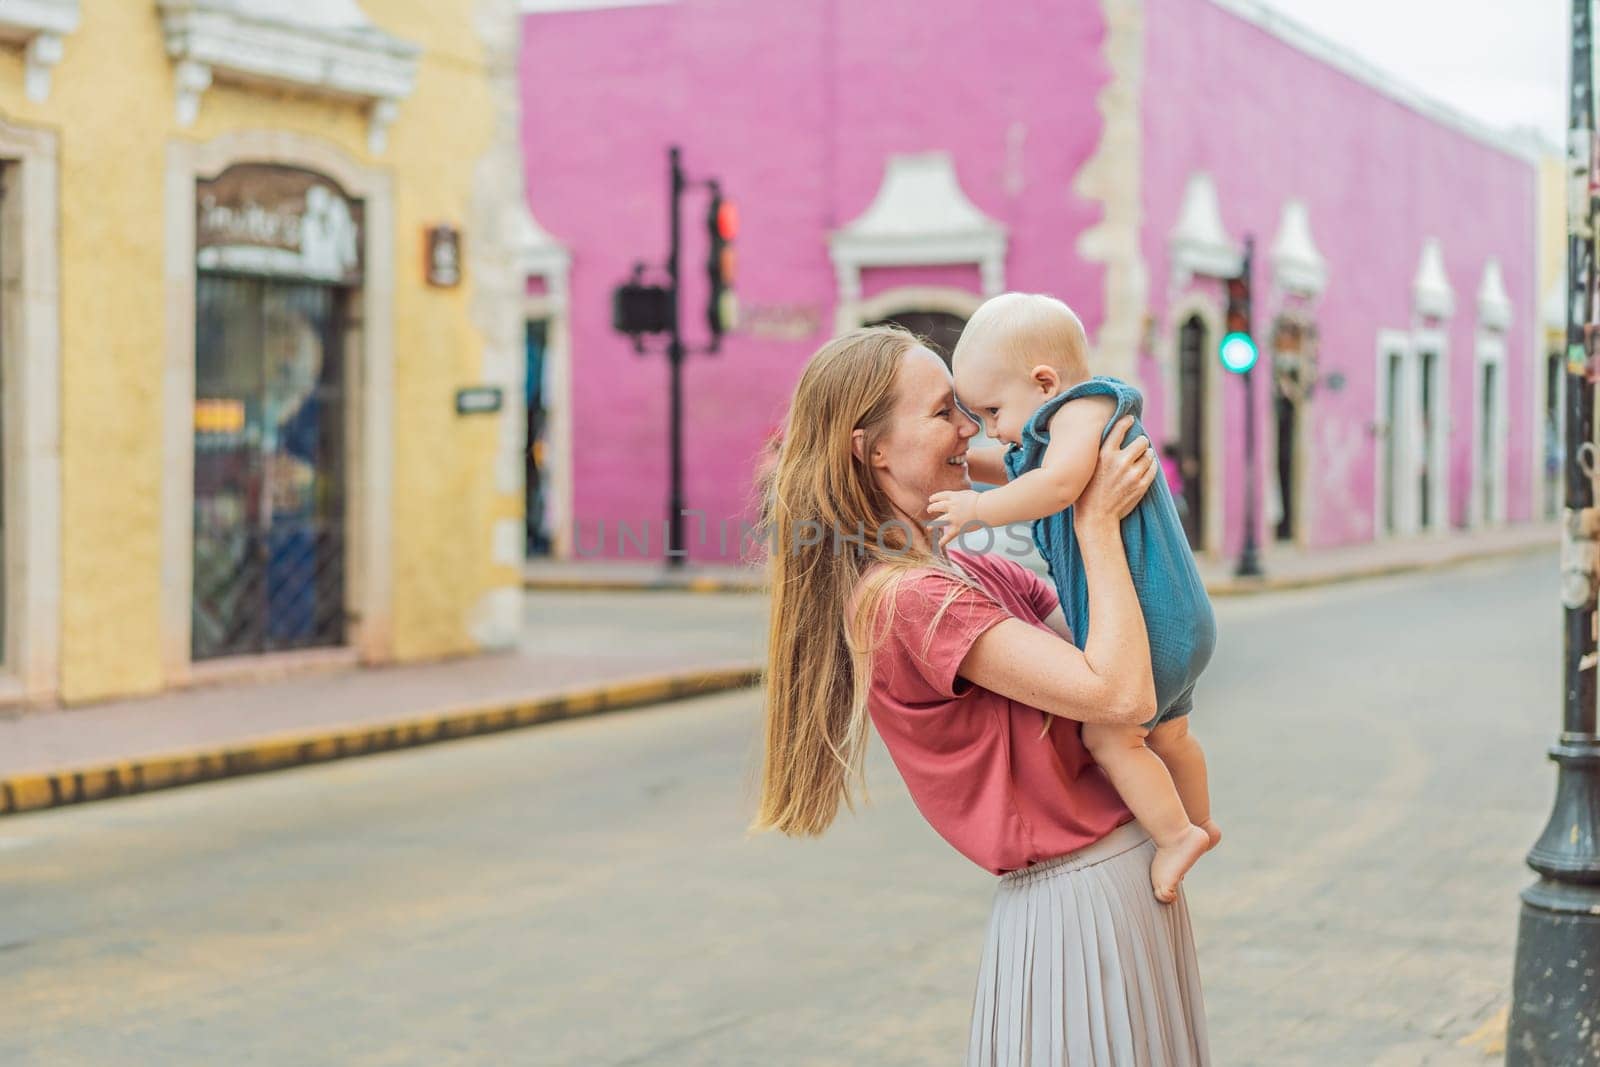 Mother and baby son tourists explore the vibrant streets of Valladolid, Mexico, immersing herself in the rich culture and colorful architecture of this charming colonial town.